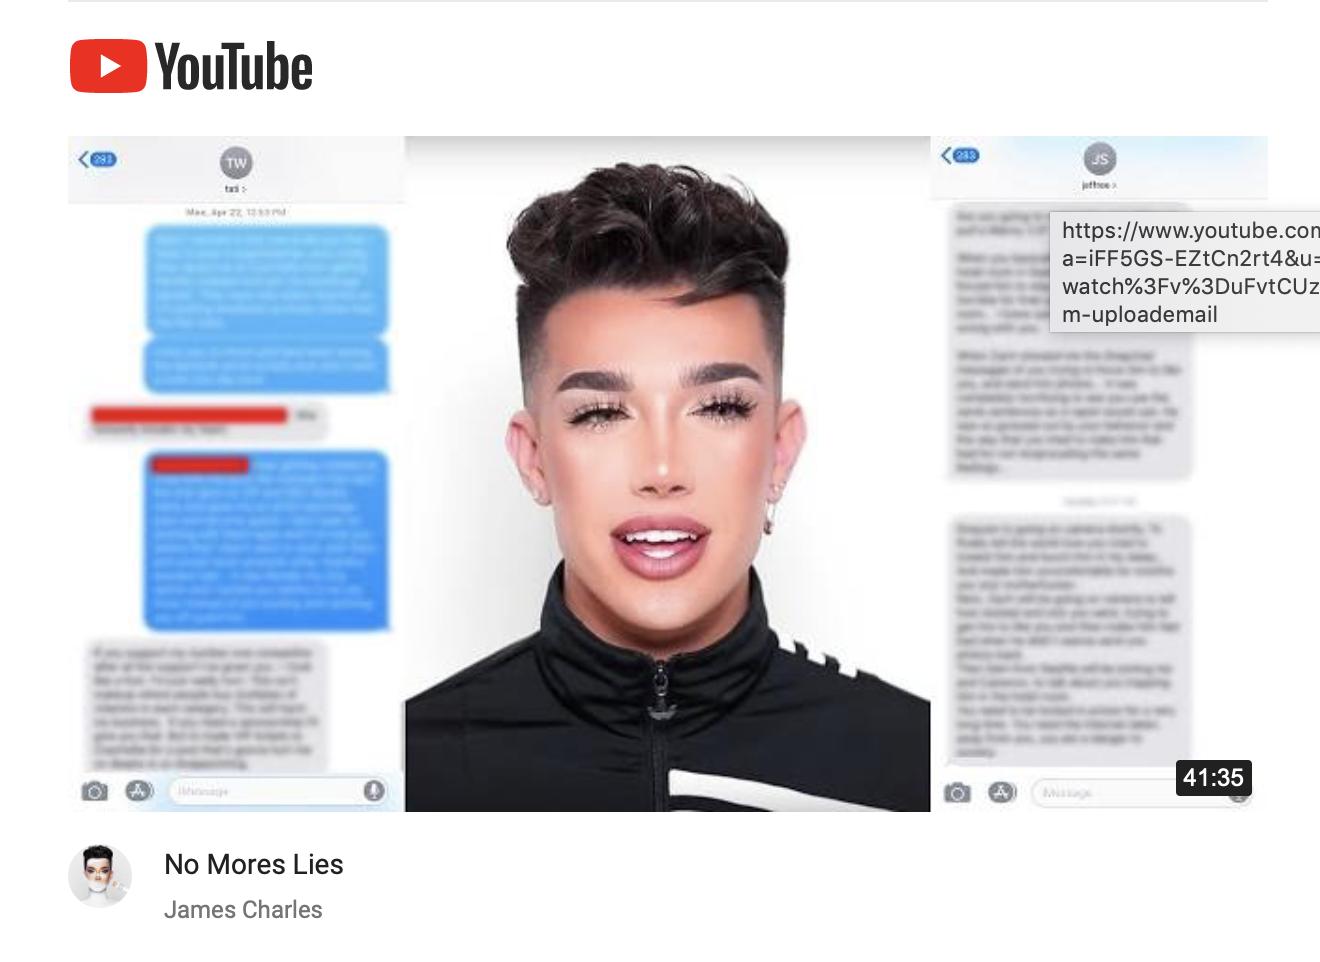 James Charles uploads YouTube video titled 'No More Lies' debunking the claims Tati made against him